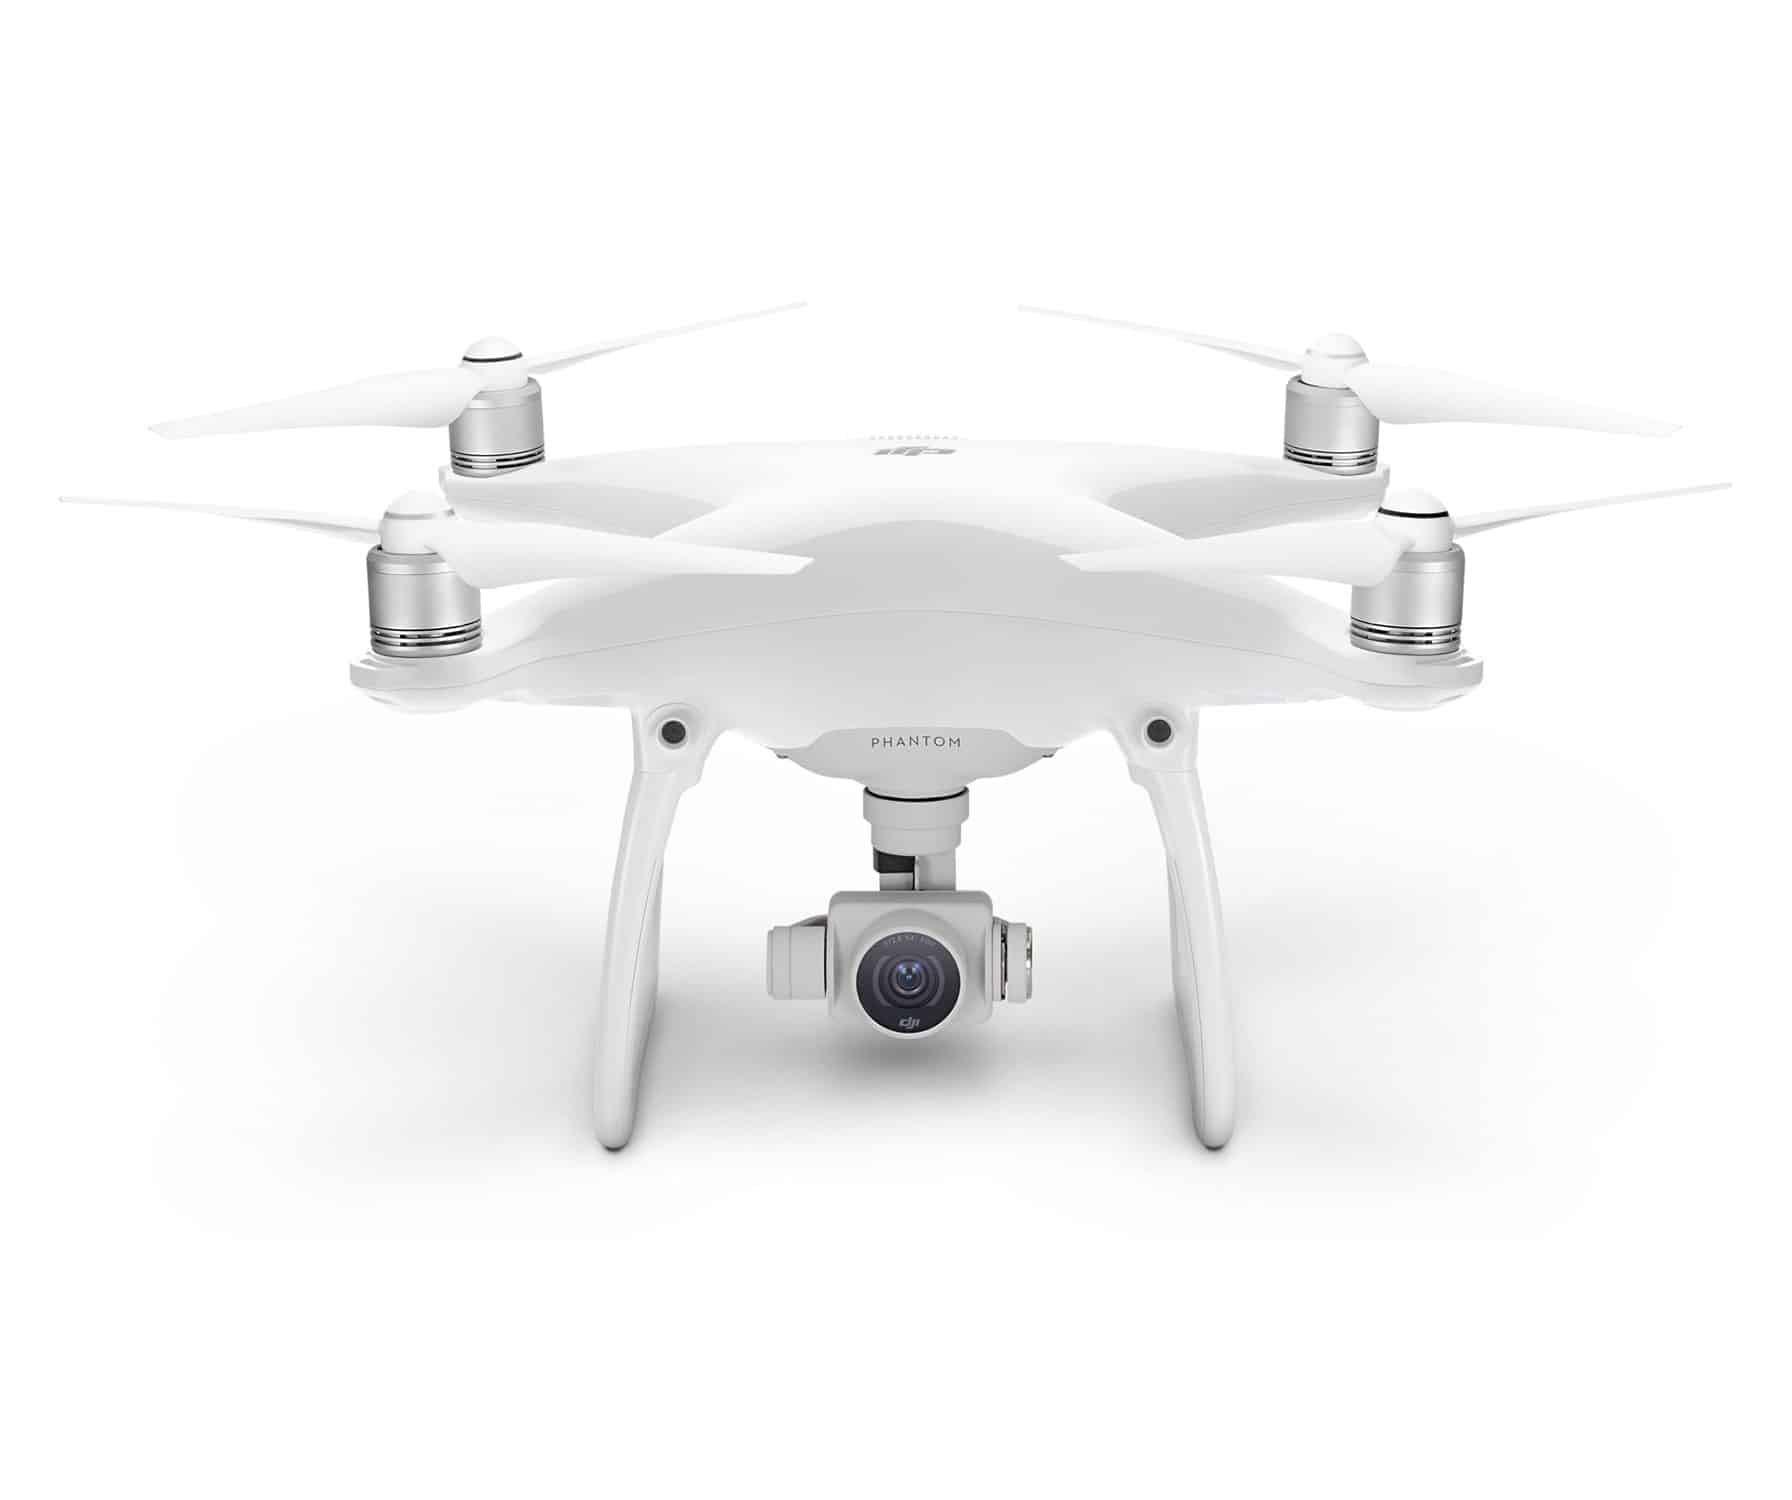 Top 5 Best Professional Drone Reviews